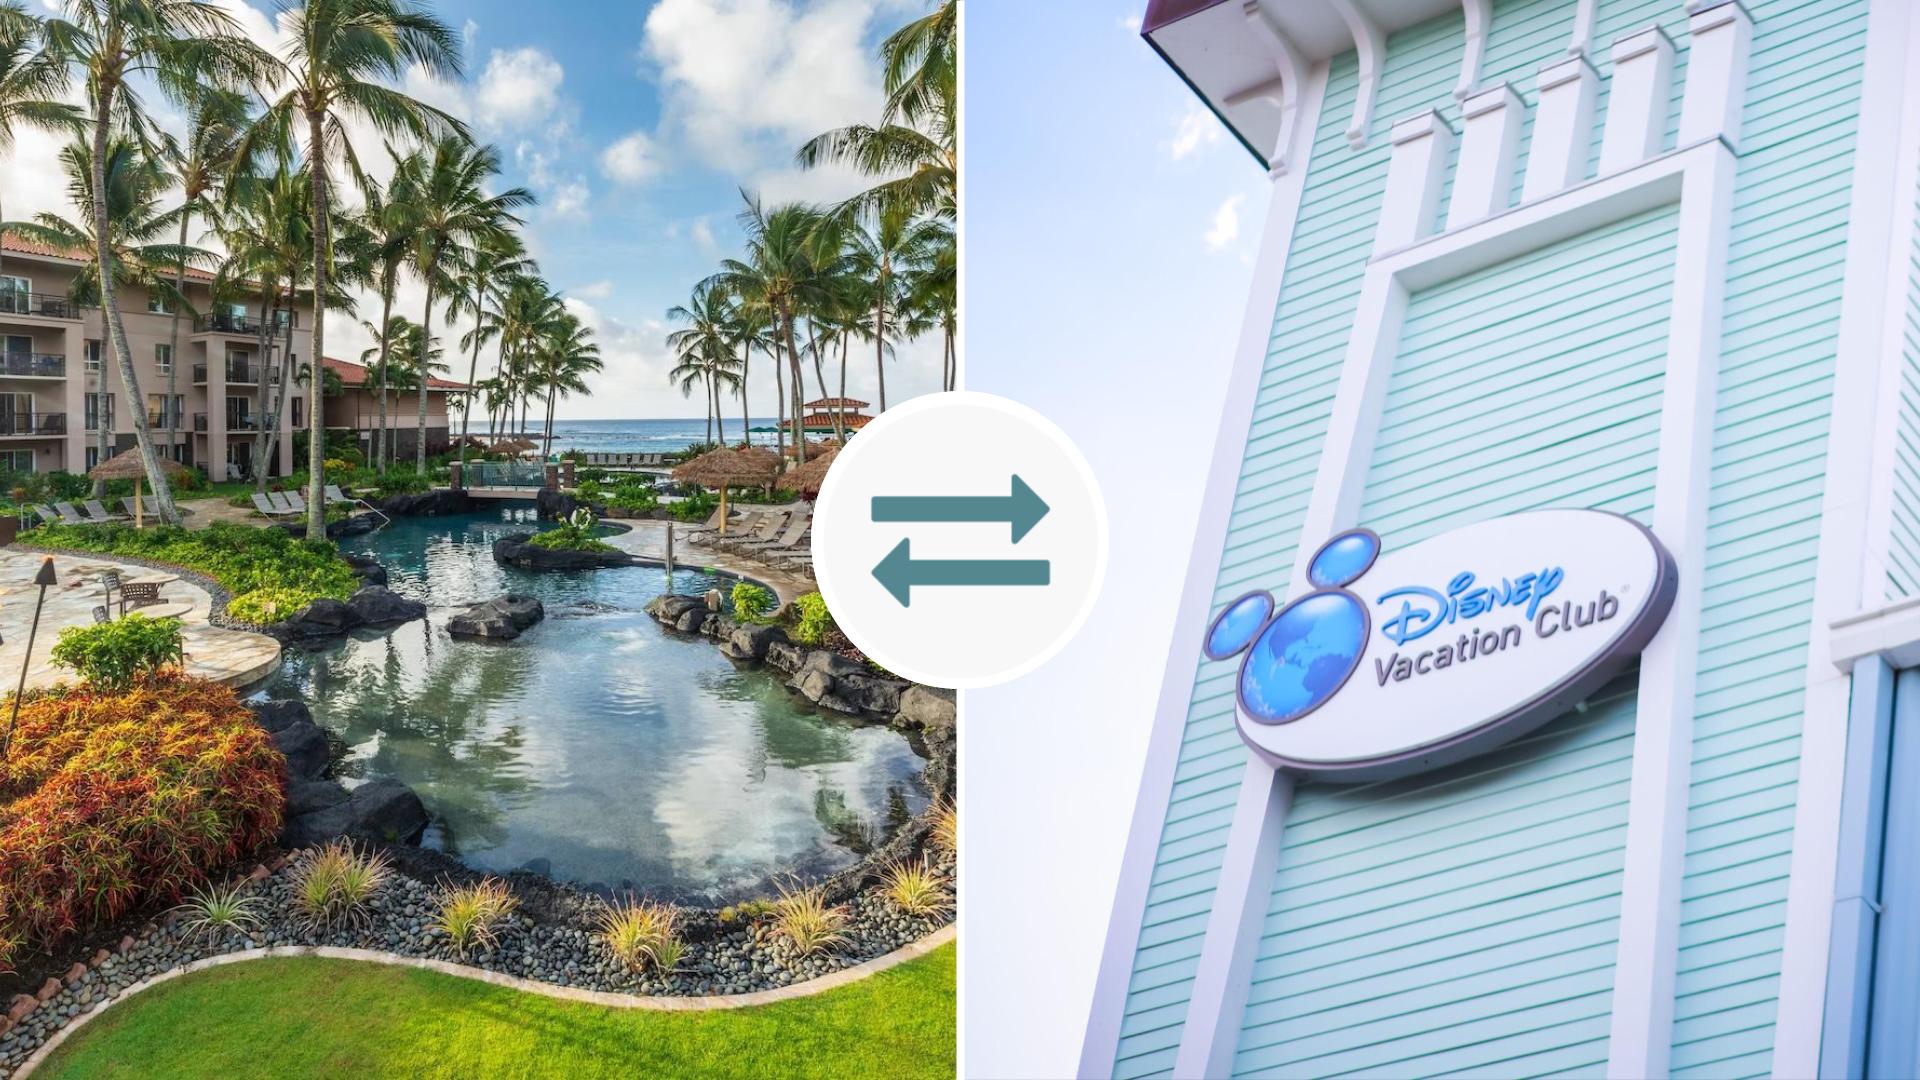 Trading Into DVC with Interval International